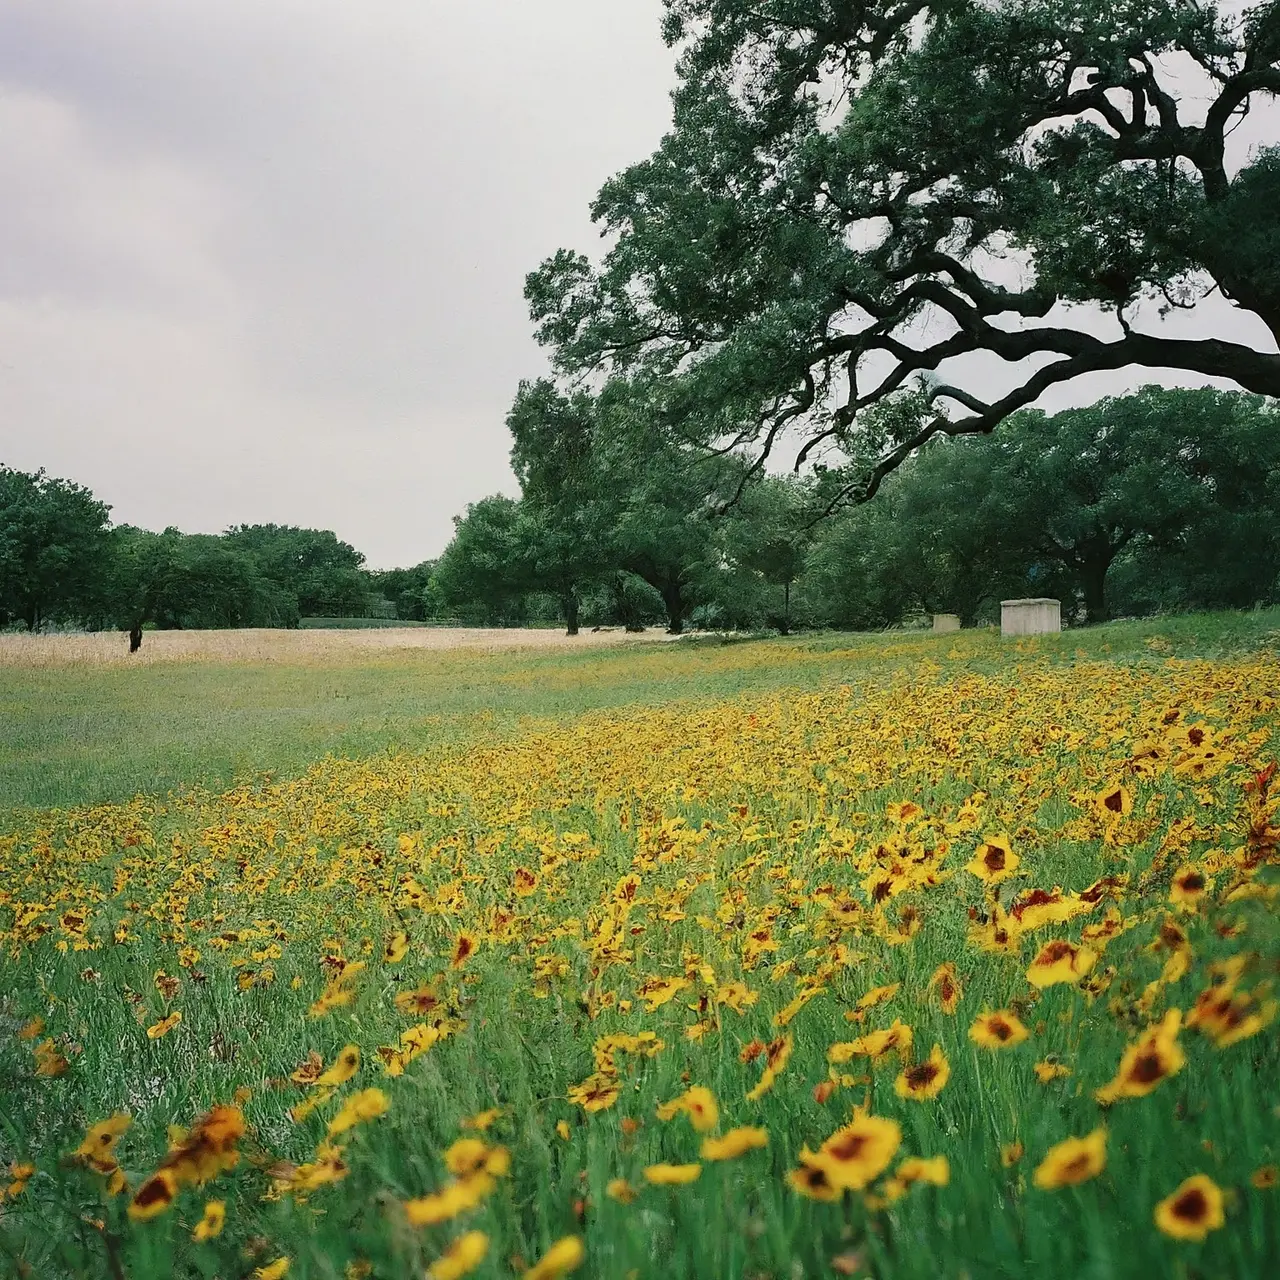 A green burial site with wildflowers in Austin, Texas. 35mm stock photo